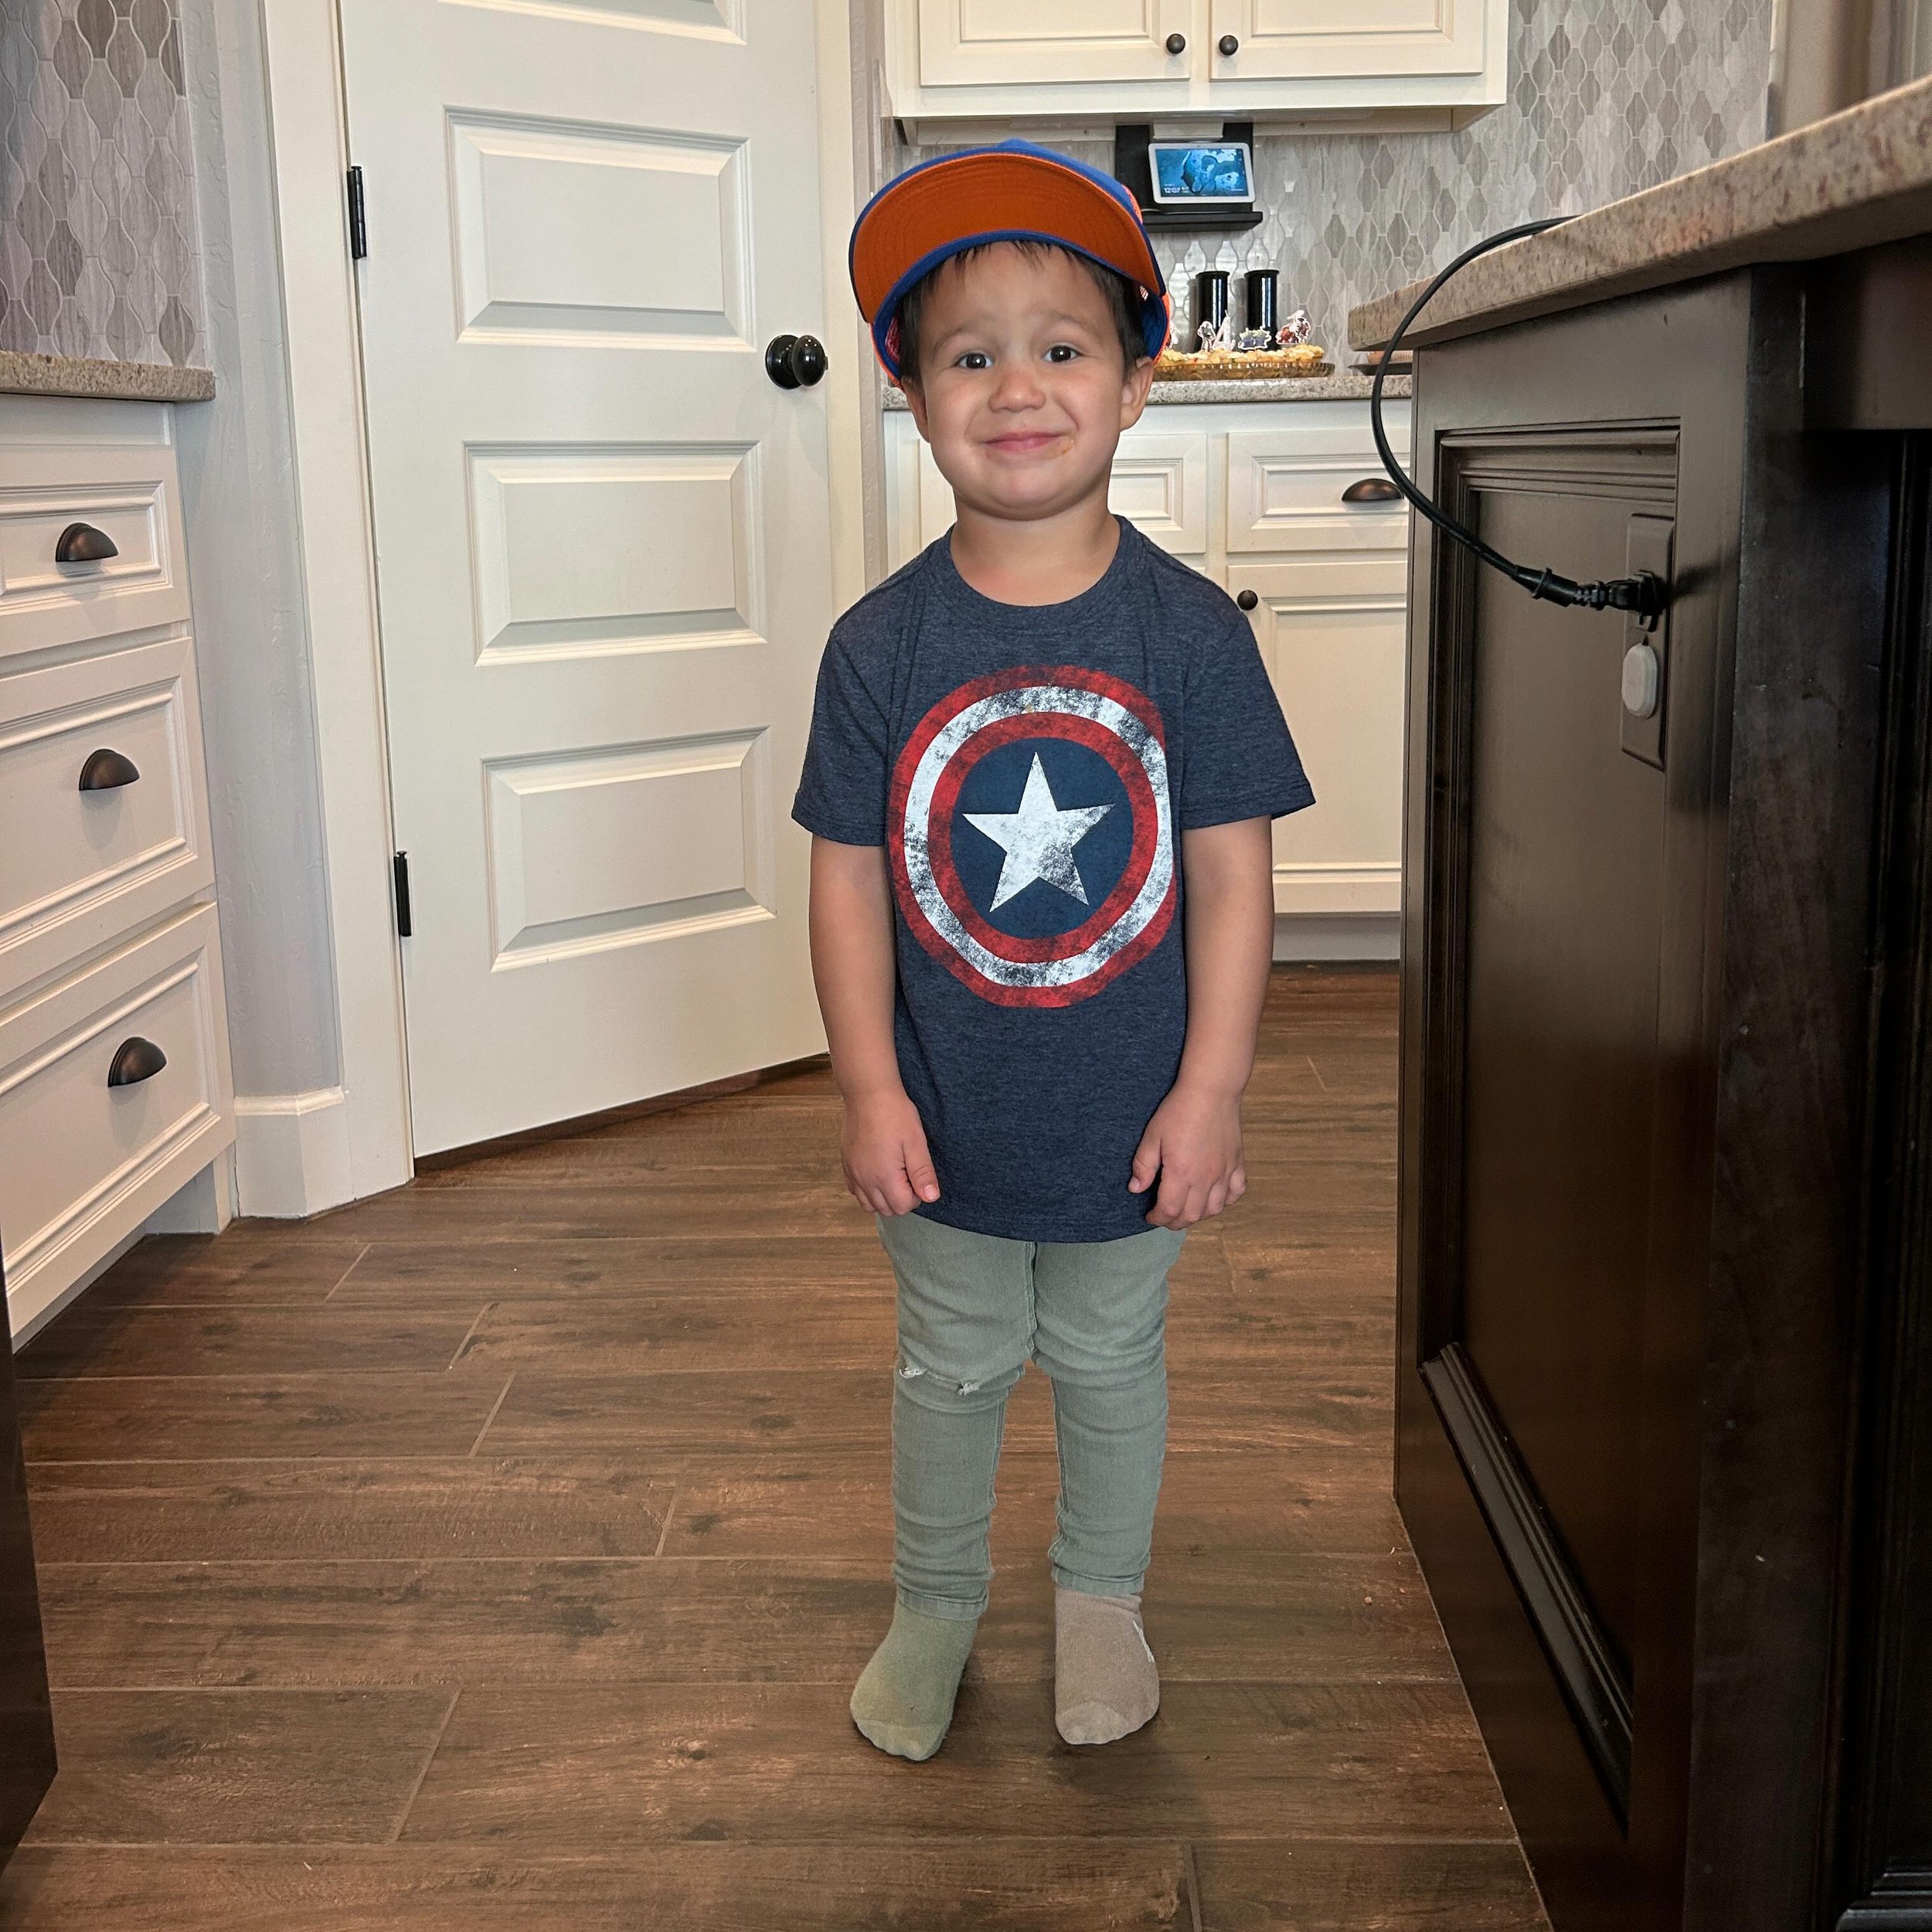 Few things make this boy smile for pictures, but being the birthday boy is one of them! Happy 4th birthday to the boy who wears us all out, but equally fills our heart so full. Love you, Luca Puka!